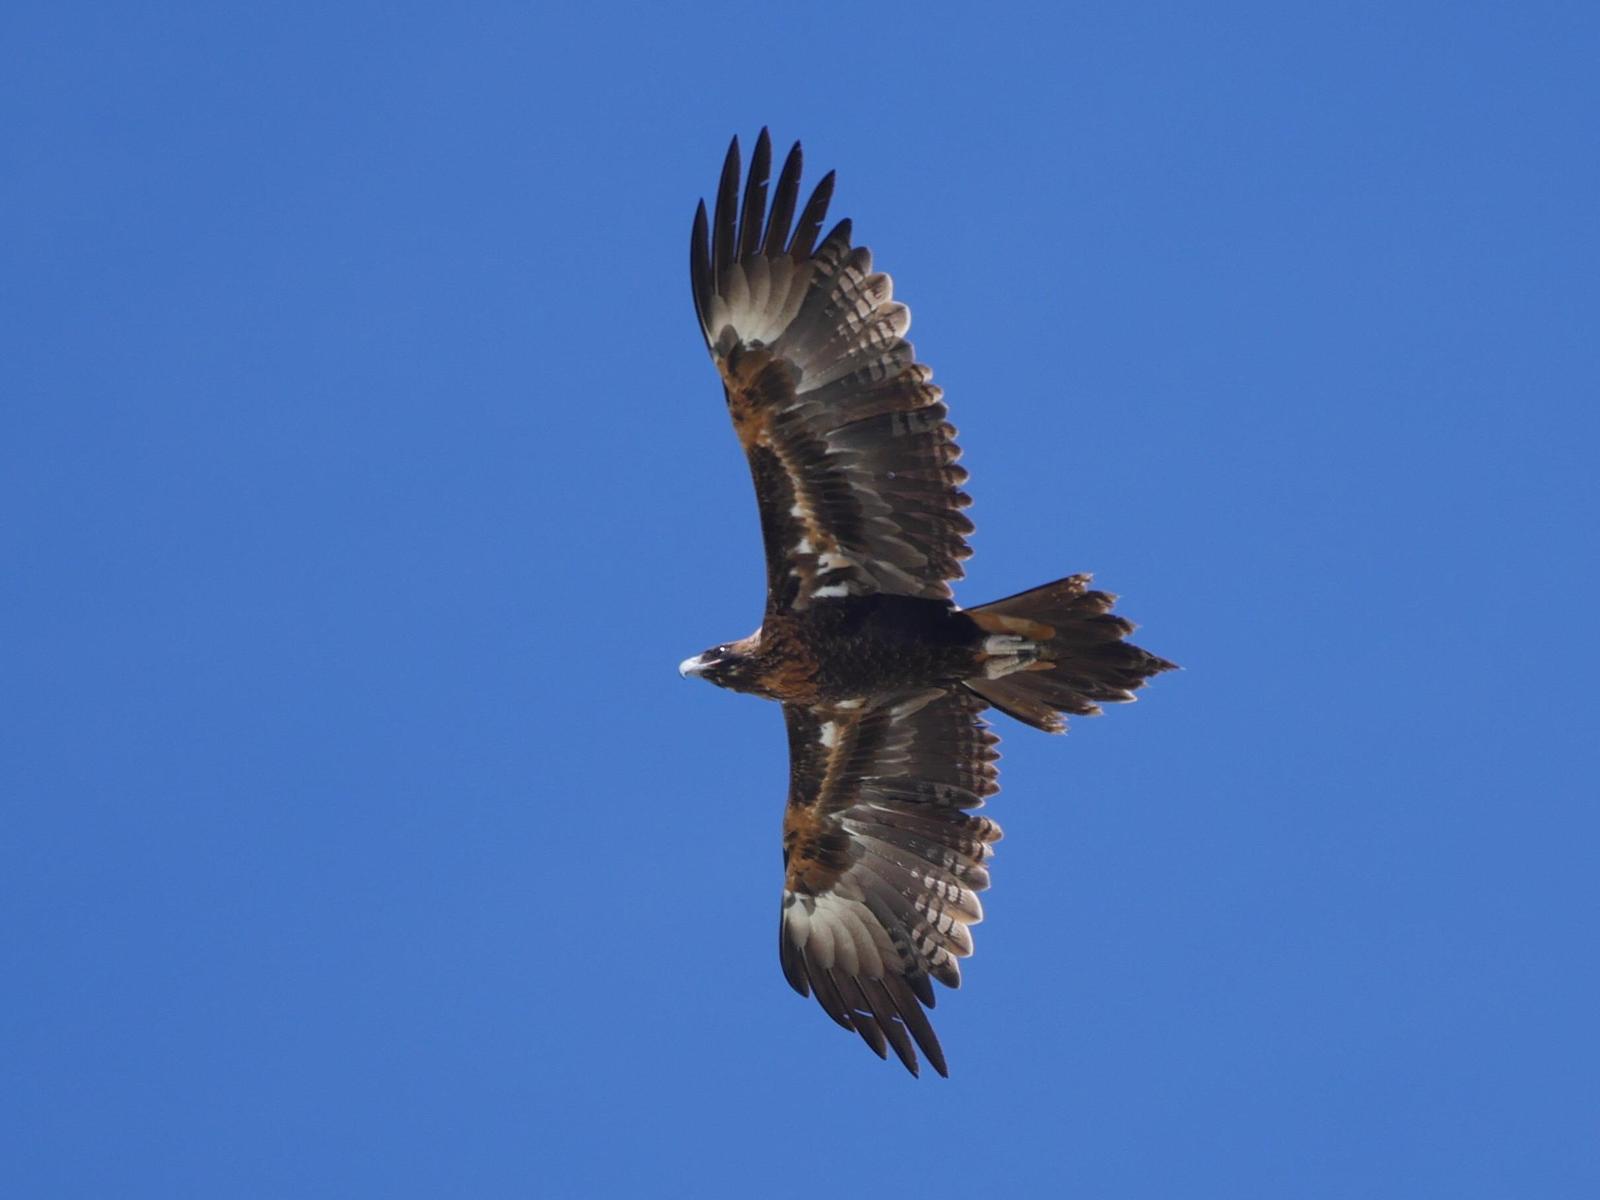 Wedge-tailed Eagle Photo by Peter Lowe